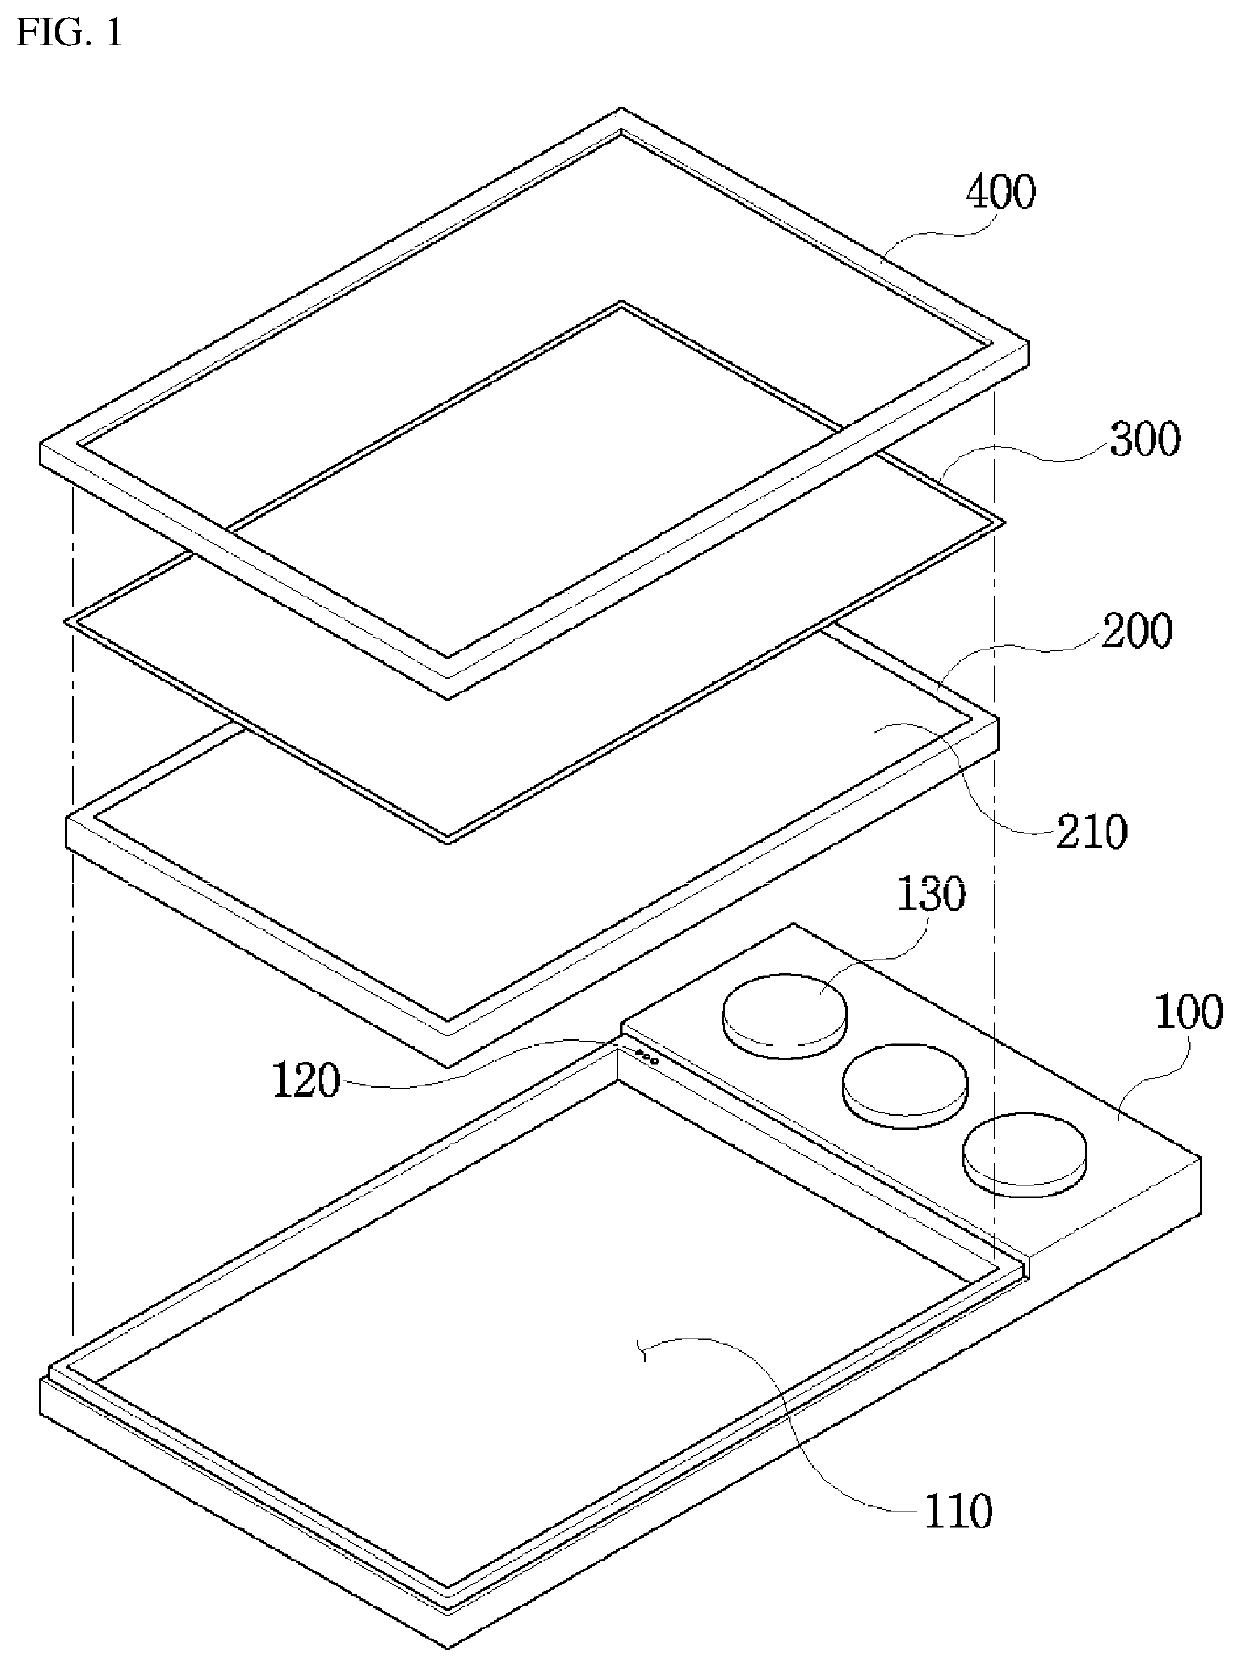 Apparatus for providing haptic pattern on smart device